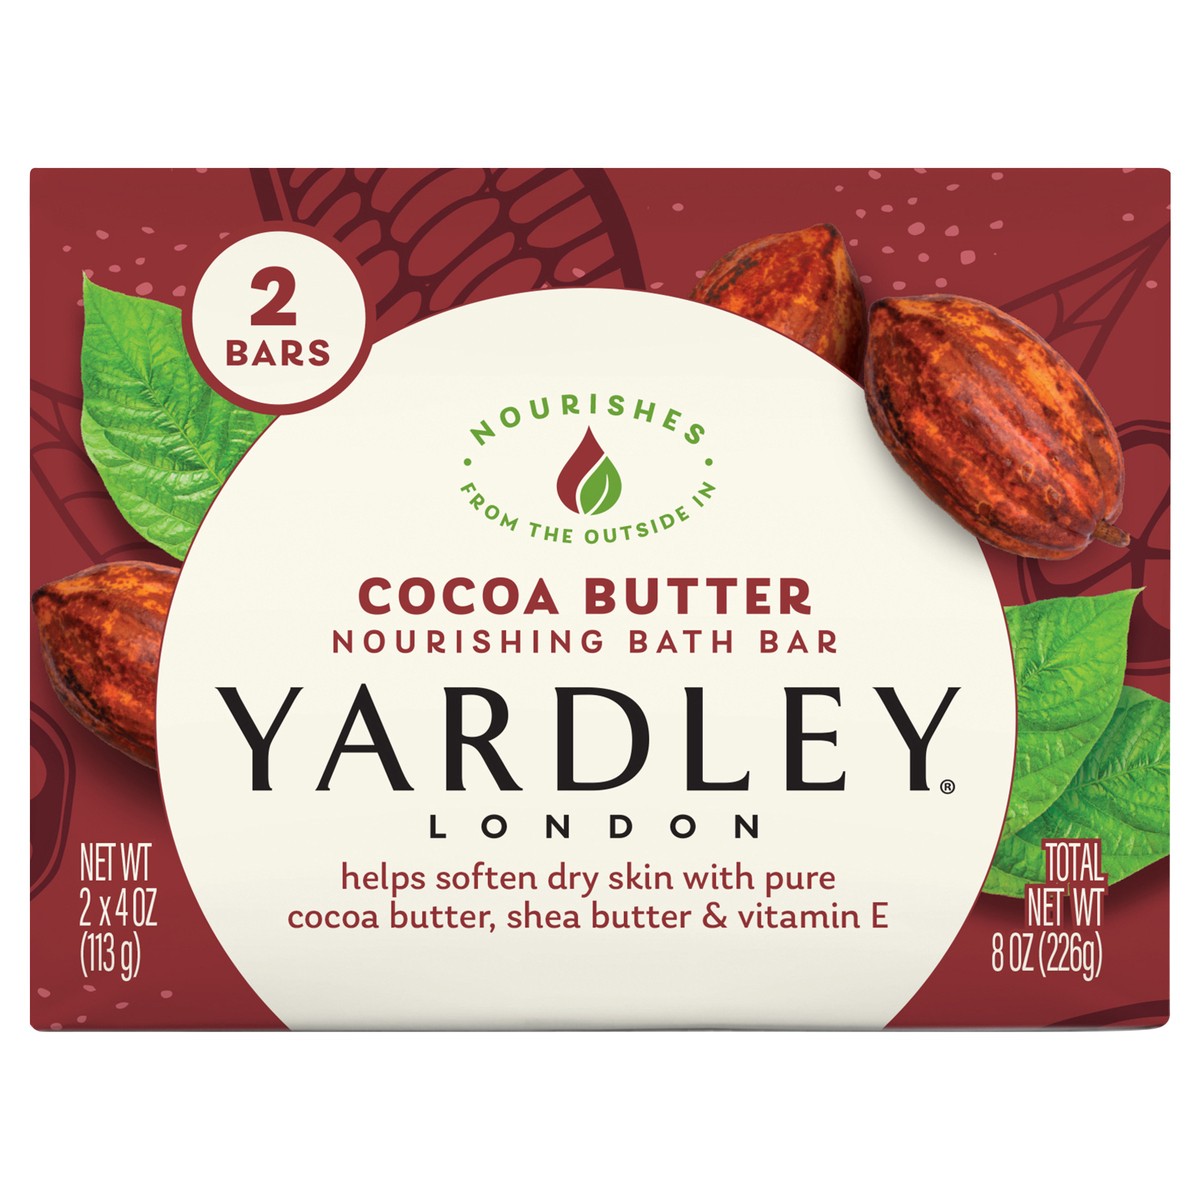 slide 7 of 10, Yardley London Nourishing Bath Soap Bar Cocoa Butter, Helps Soften Dry Skin with Pure Cocoa Butter, Shea Butter & Vitamin E, 4.0 oz Bath Bar, 2 Soap Bars, 2 ct